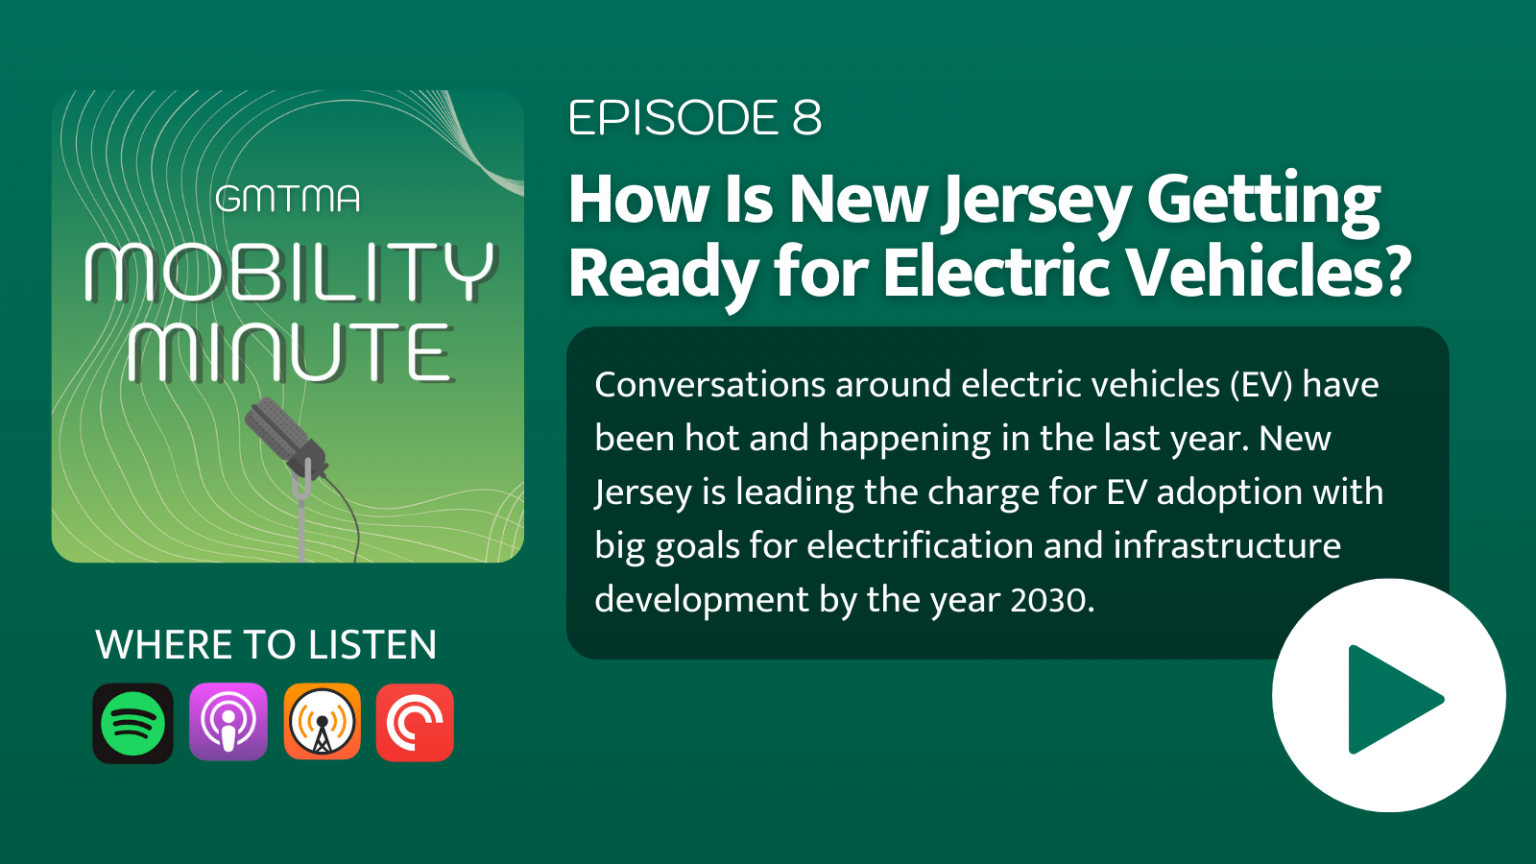 Resources for Electric Vehicle Ownership and Charging in New Jersey